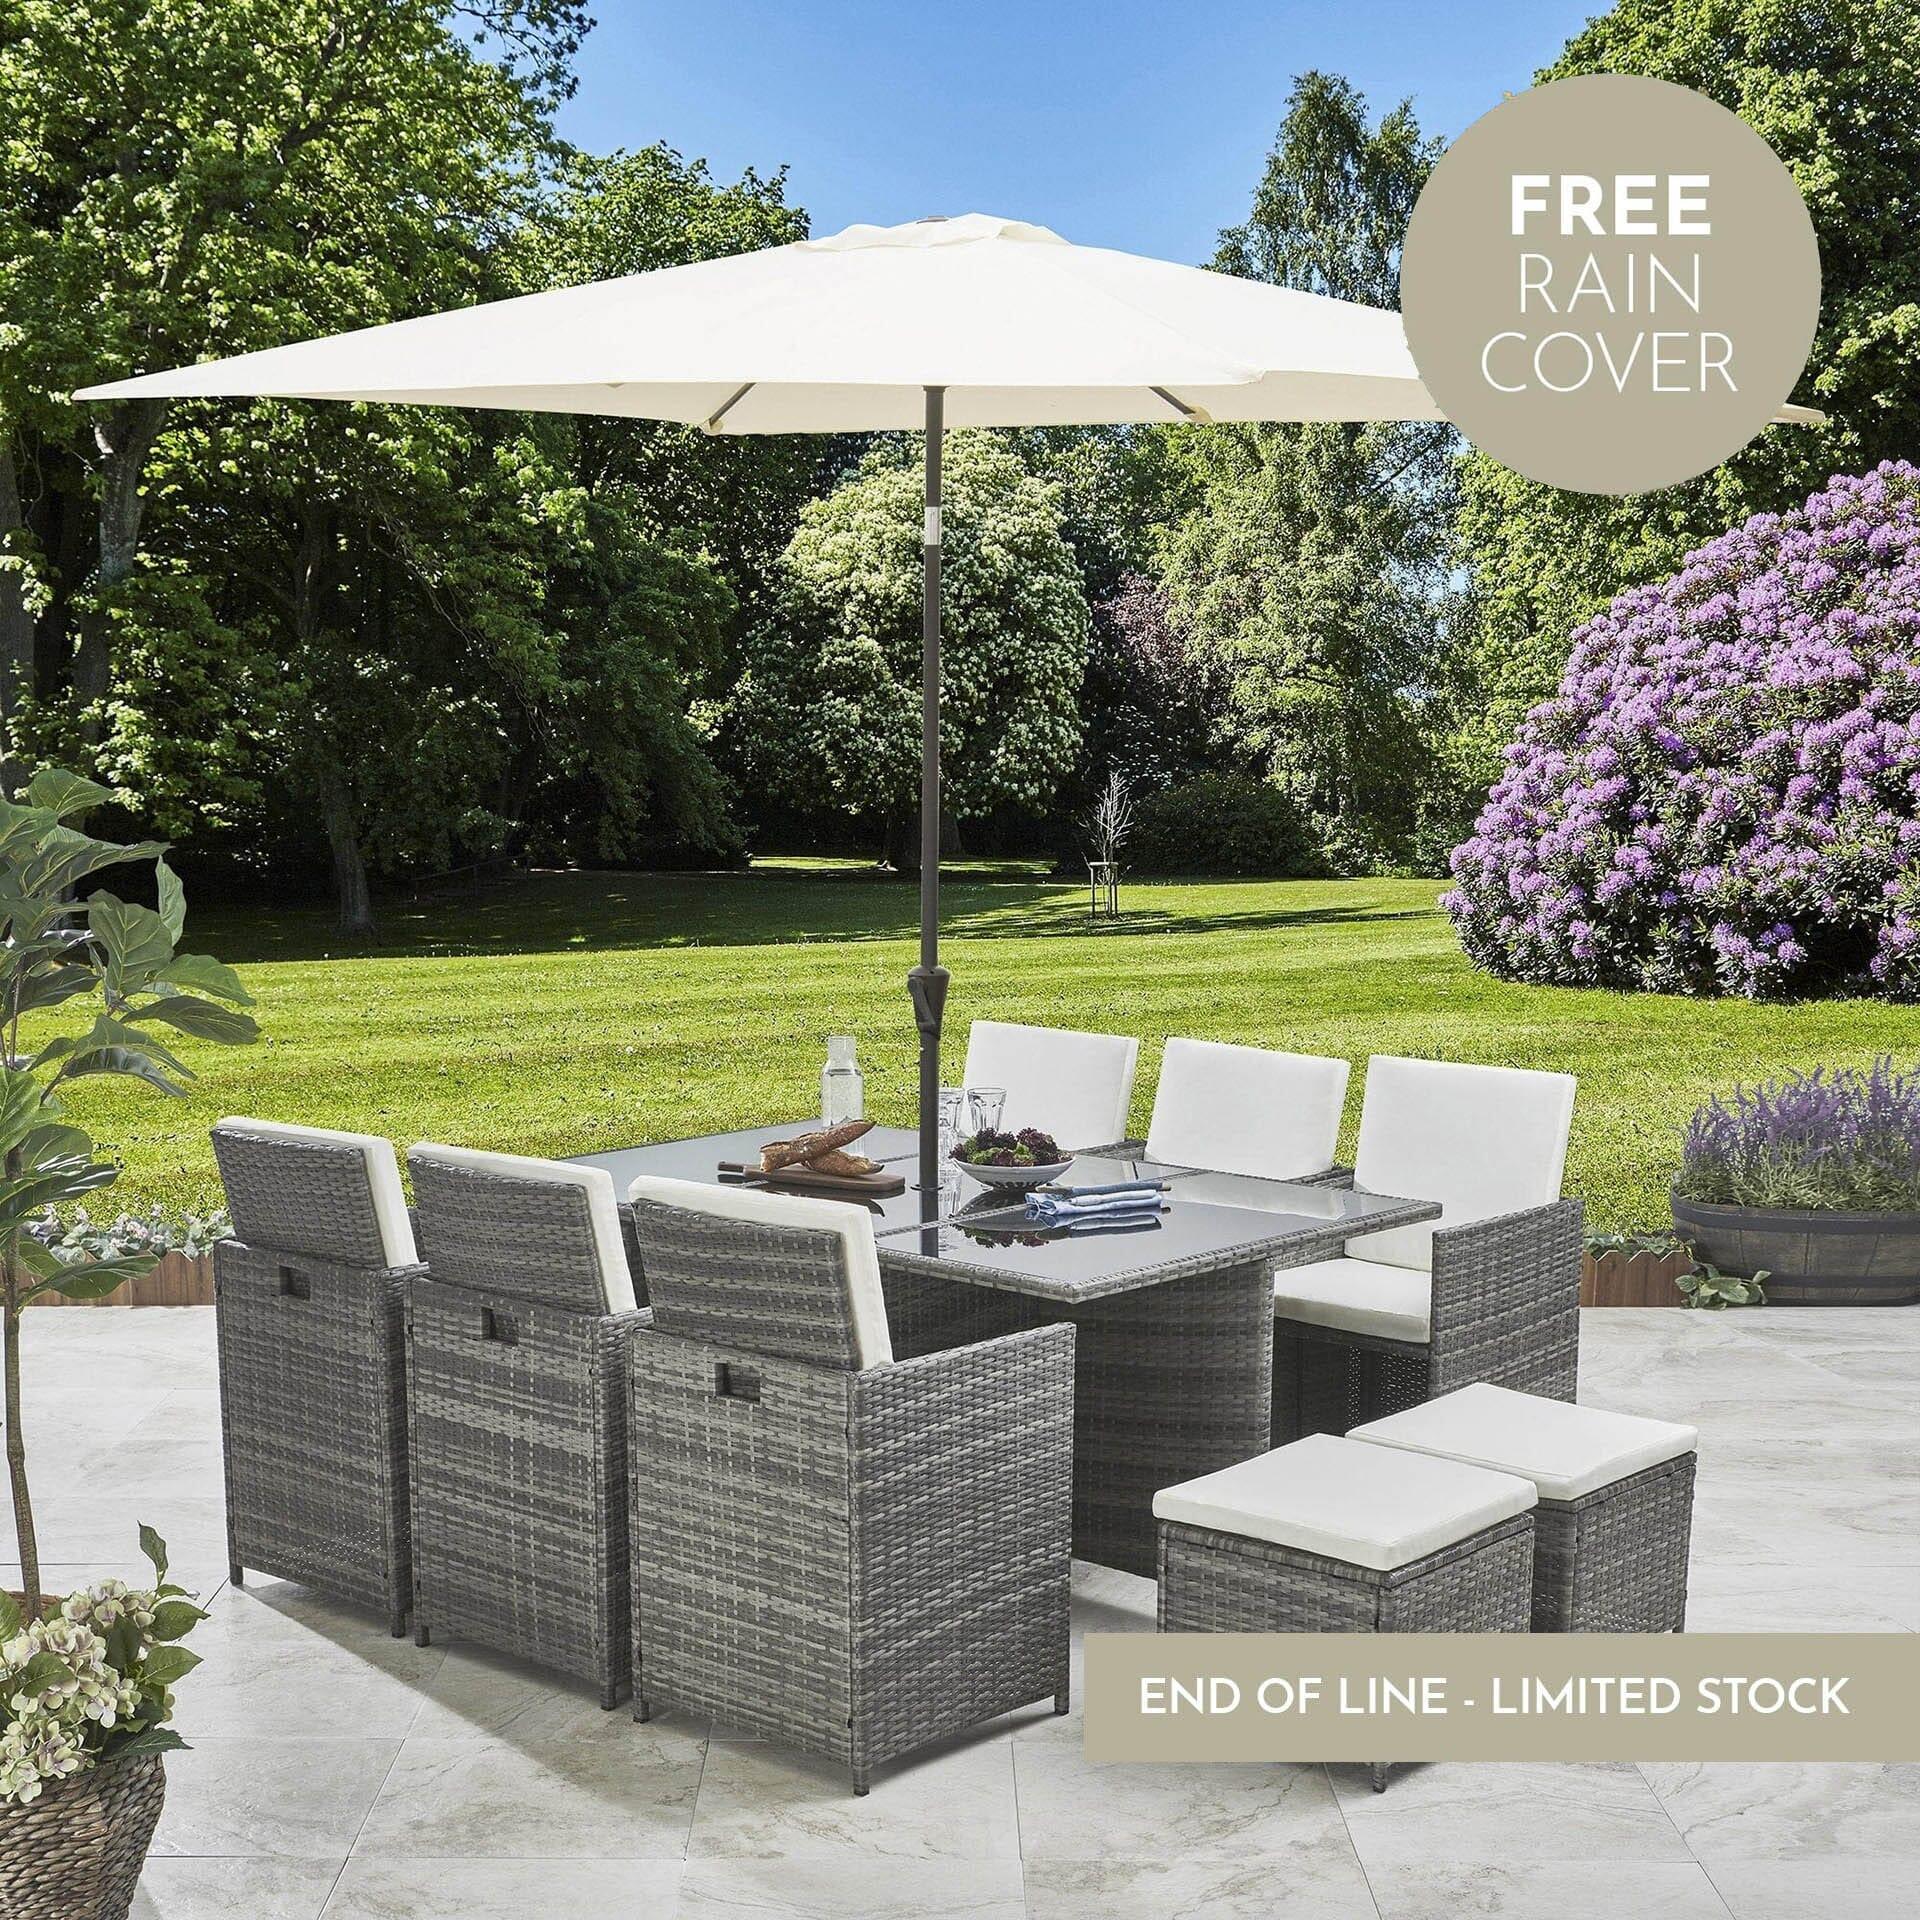 10 Seater Rattan Cube Garden Set with Cream Parasol - Outdoor Dining Furniture - (Grey Weave)